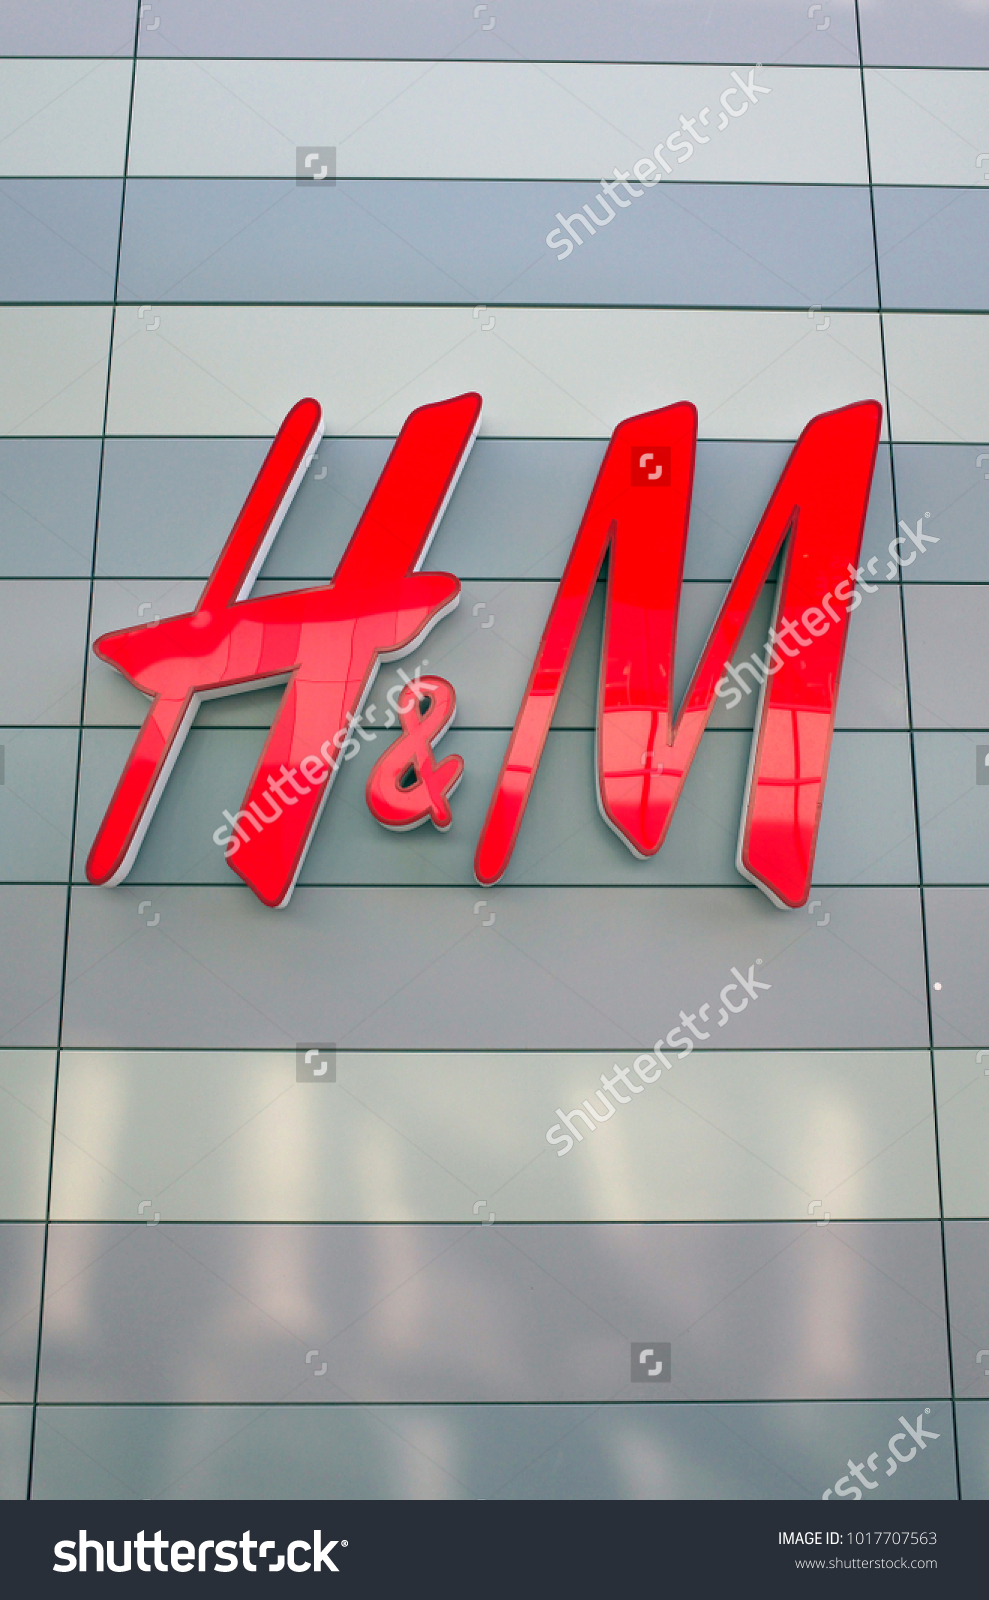 Bracknell, England - February 04, 2018: H & M shop sign on the outside of the fashion store in Bracknell, England. Originally from Sweden, H&M opened their first store in London in 1976 #1017707563